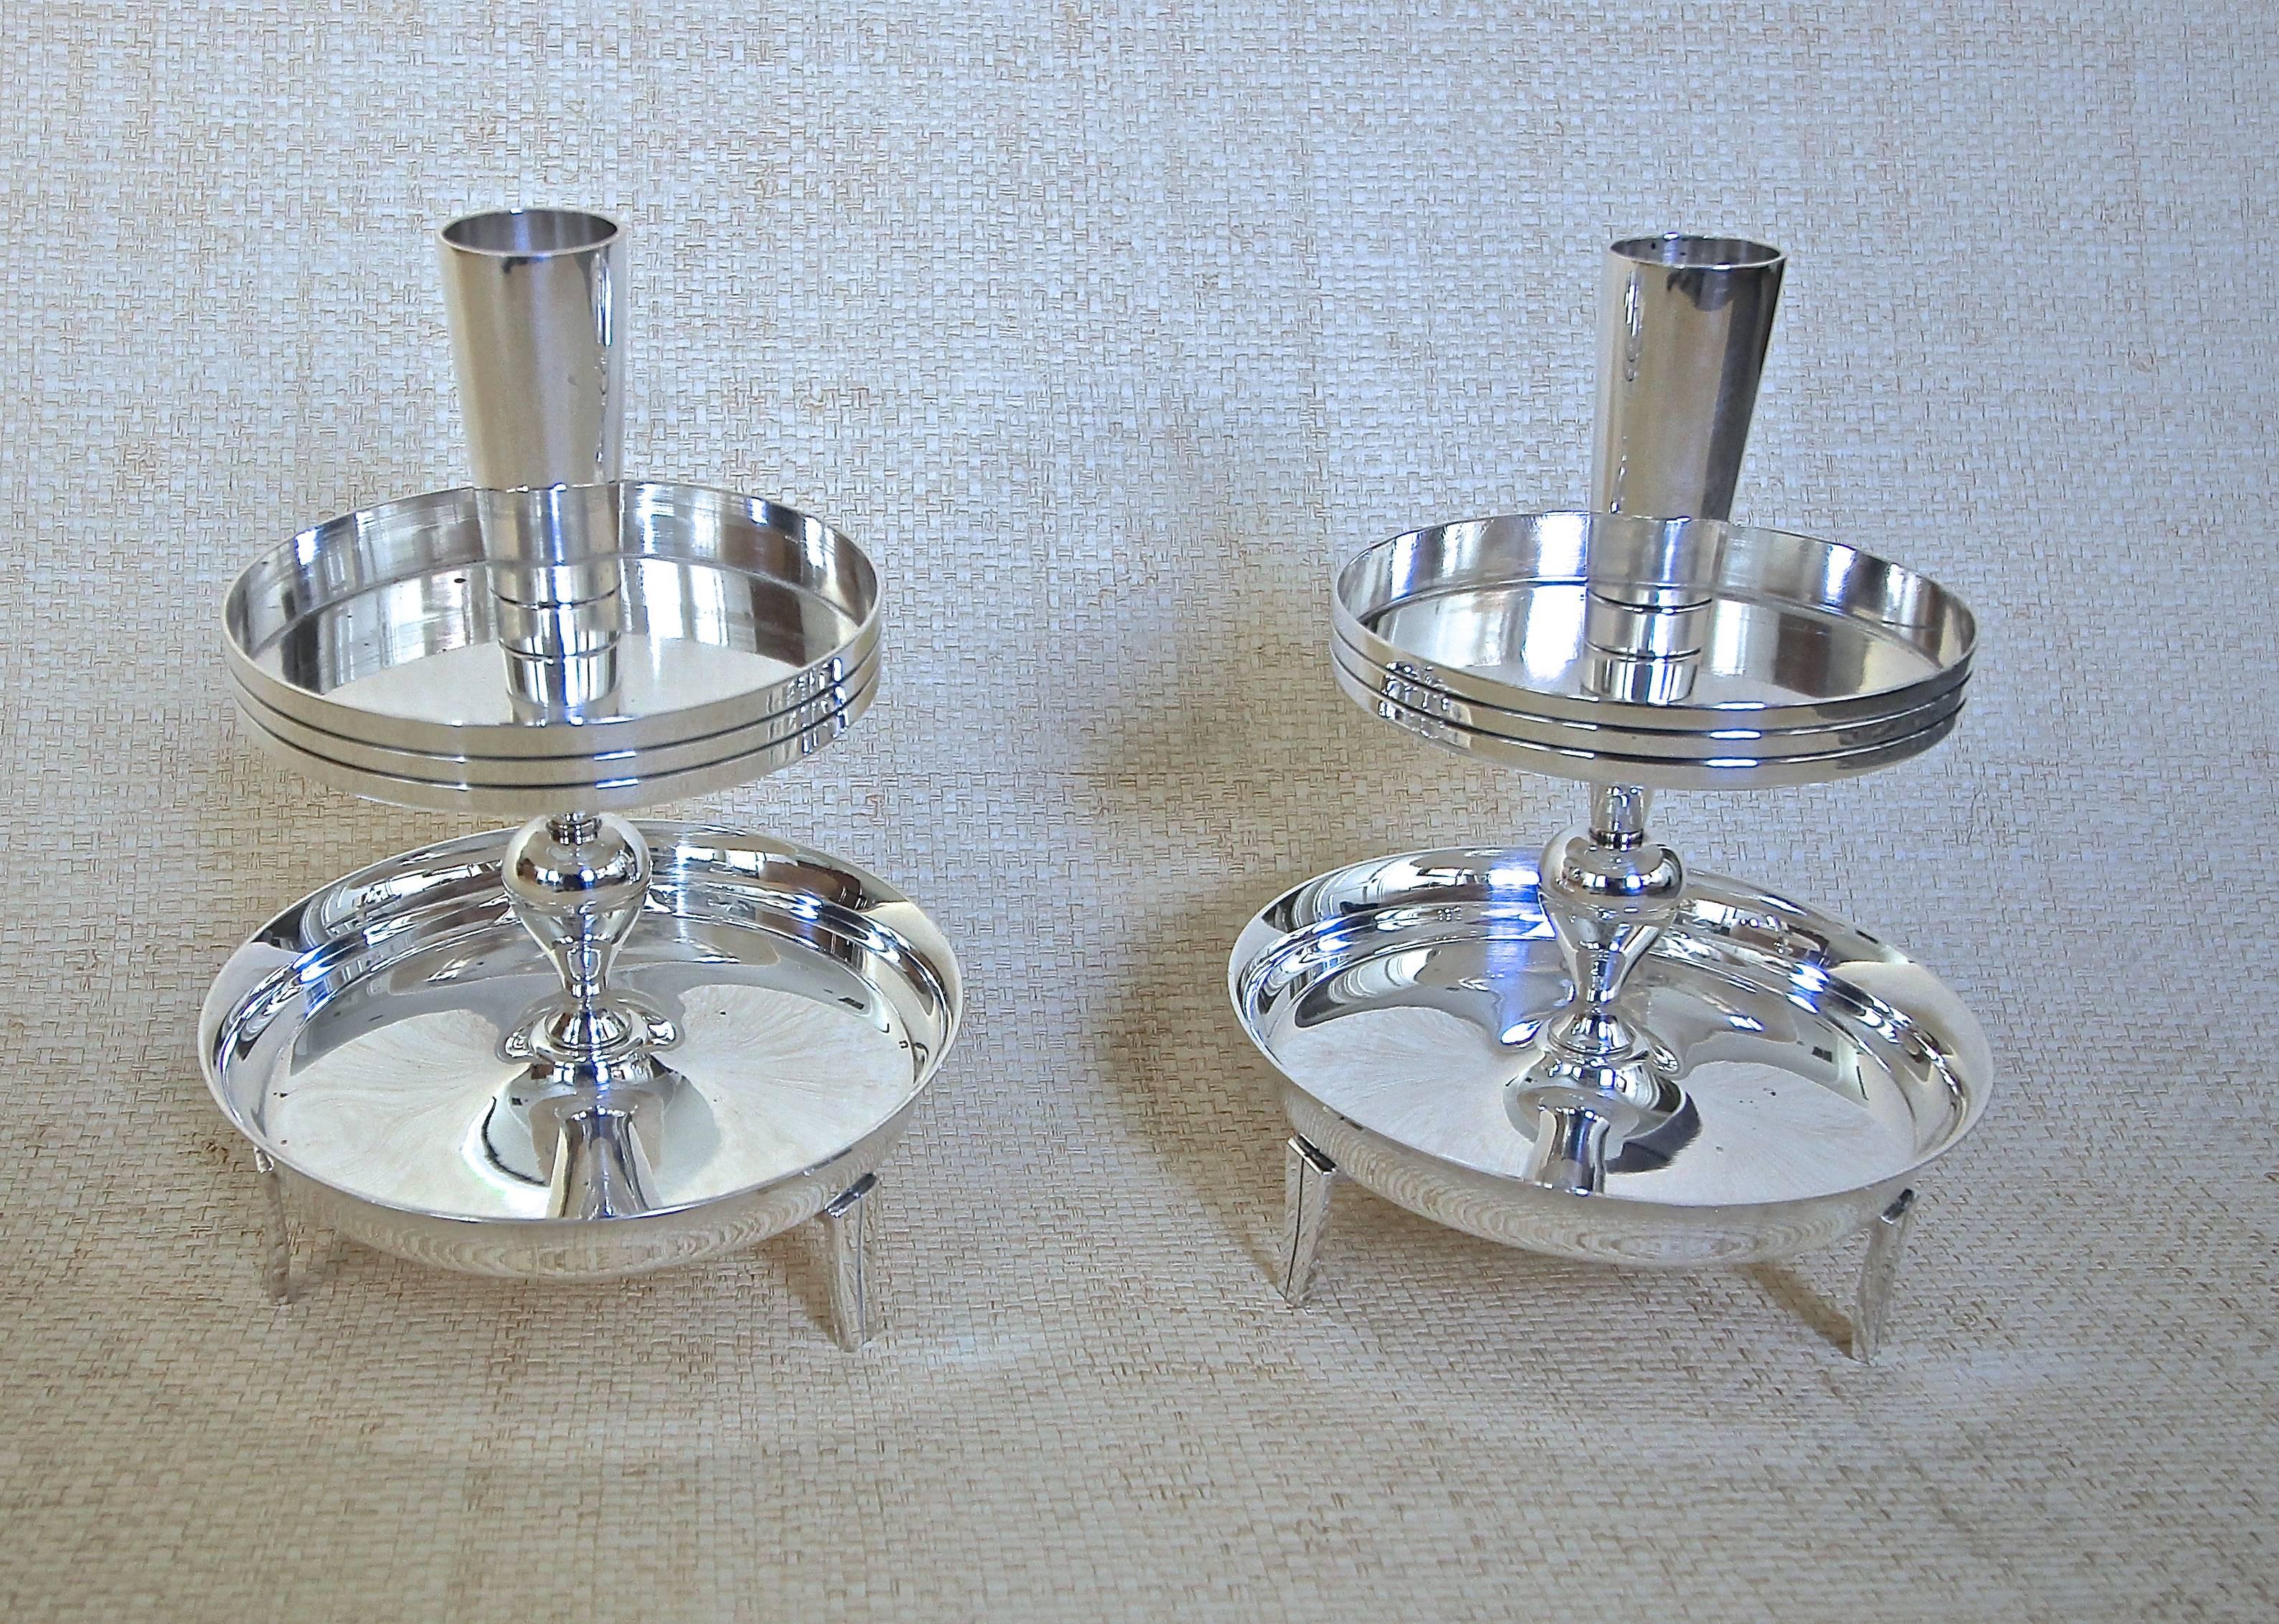 Pair of Tommi Parzinger designed two-tier silver plated brass candlesticks by Oneida Silversmiths. Stamped 